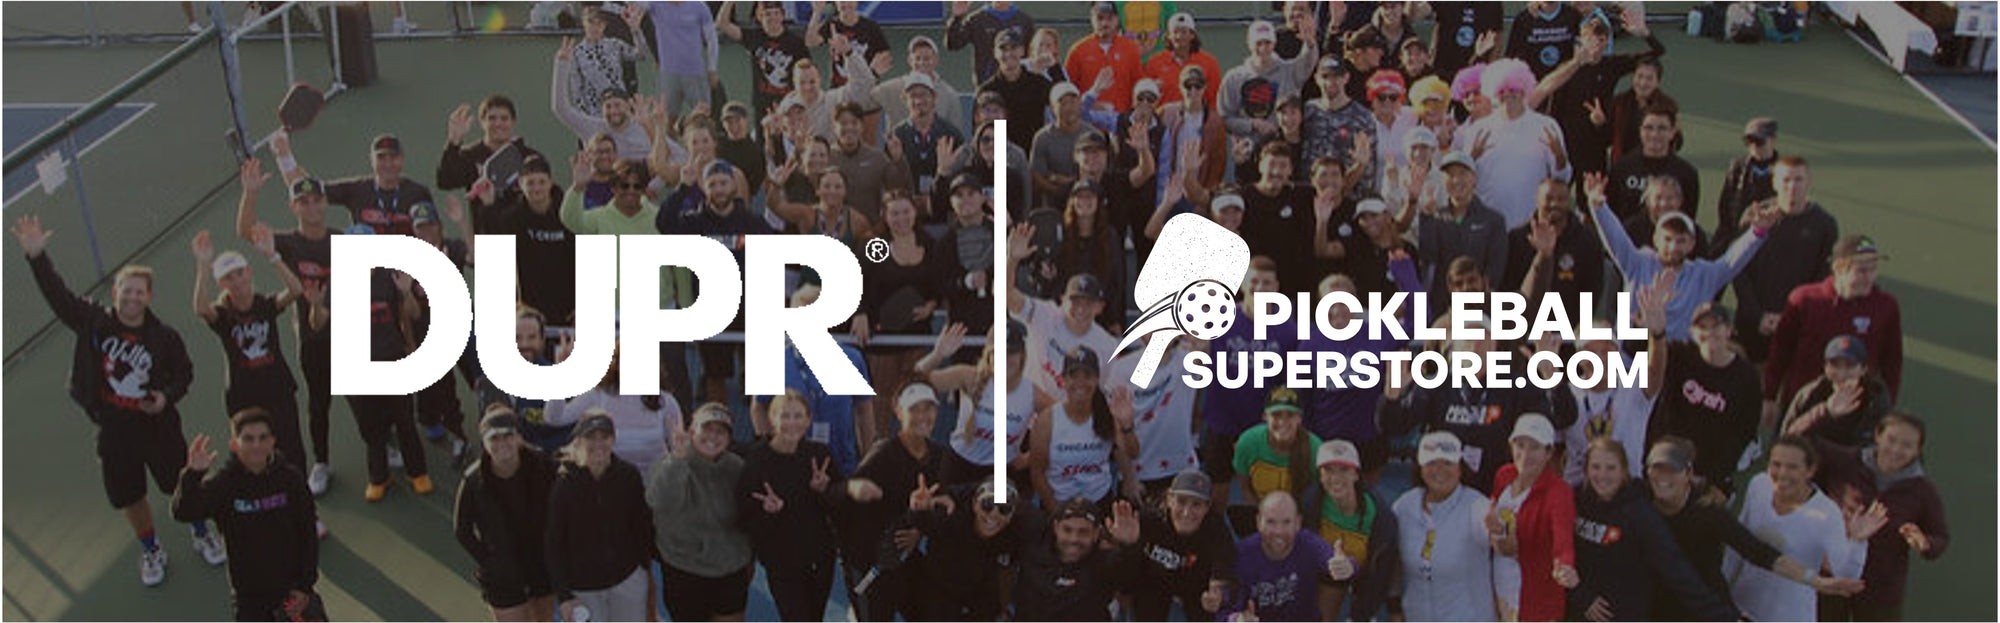 Image: DUPR and Pickleball Superstore